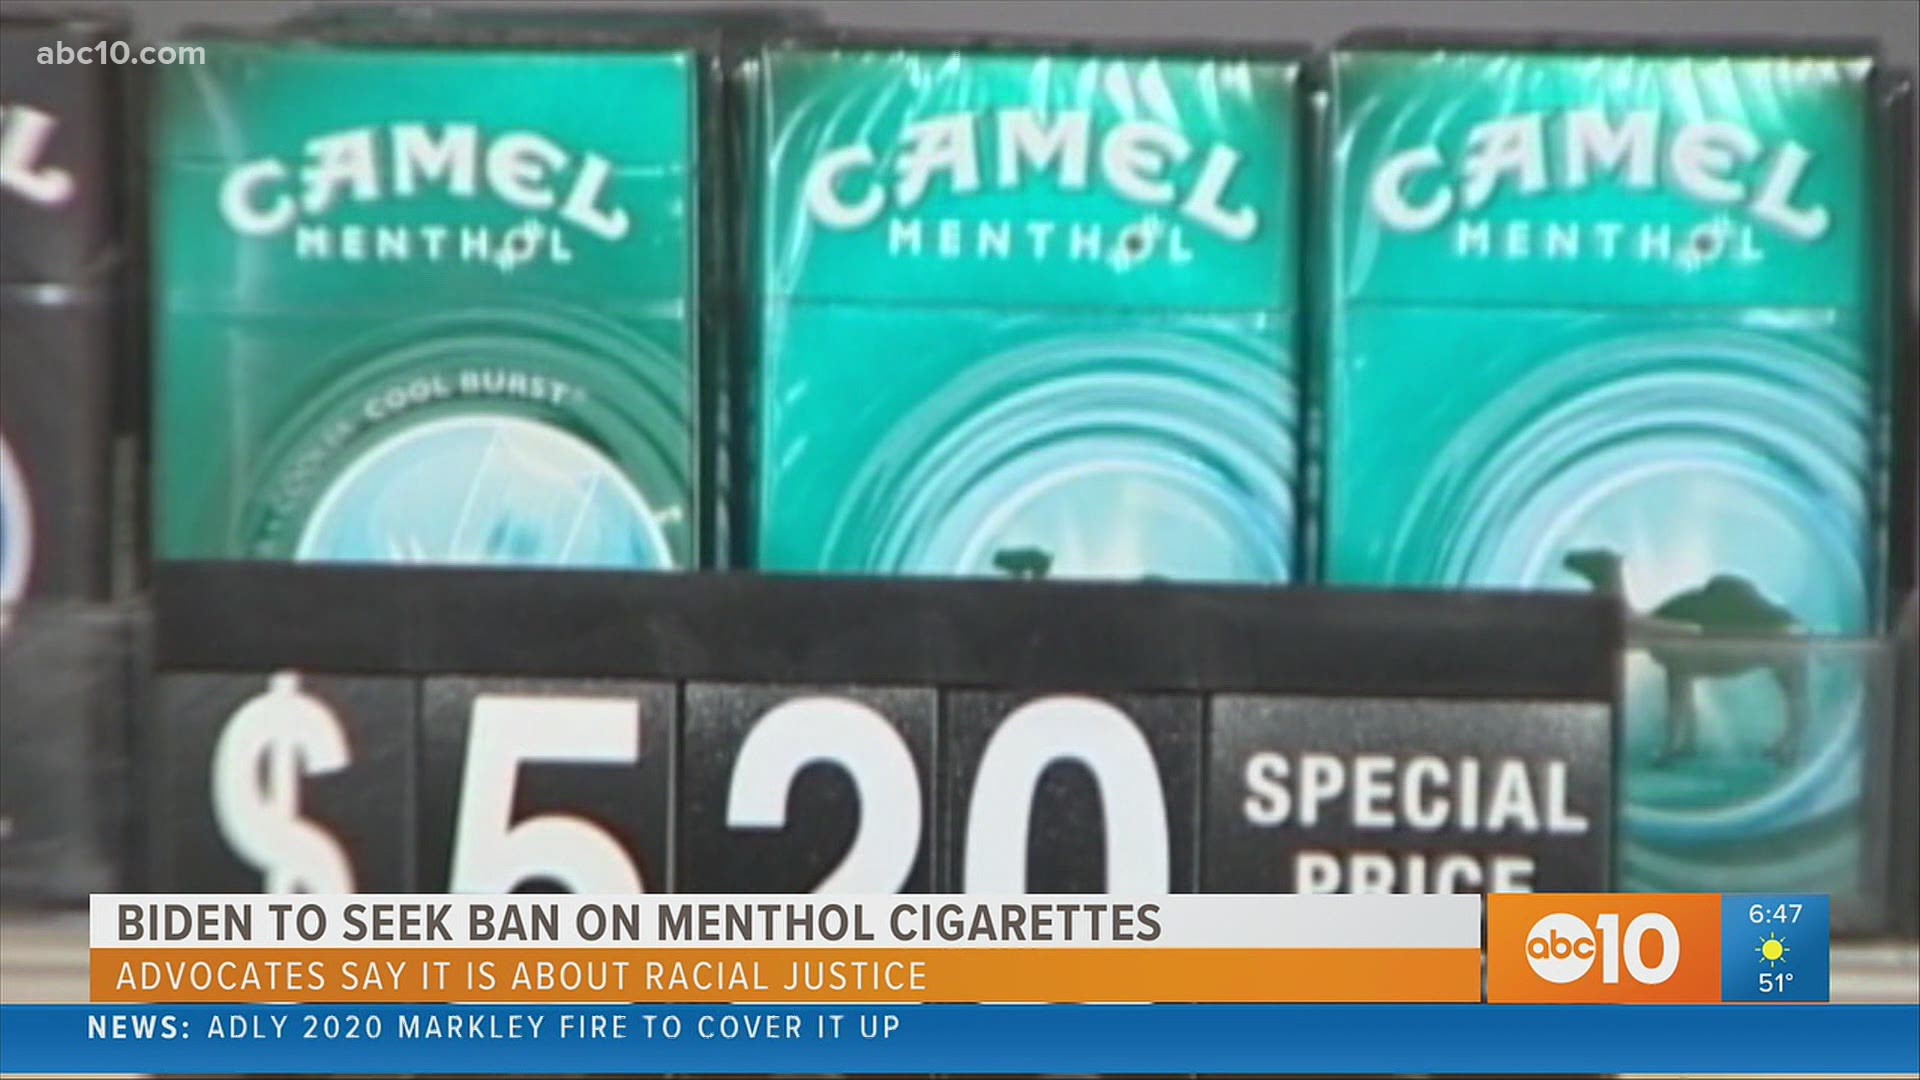 Some argue menthol cigarettes promote racial inequality, as a study from the FDA found that a little over 80% of Black smokers prefer menthol cigarettes.